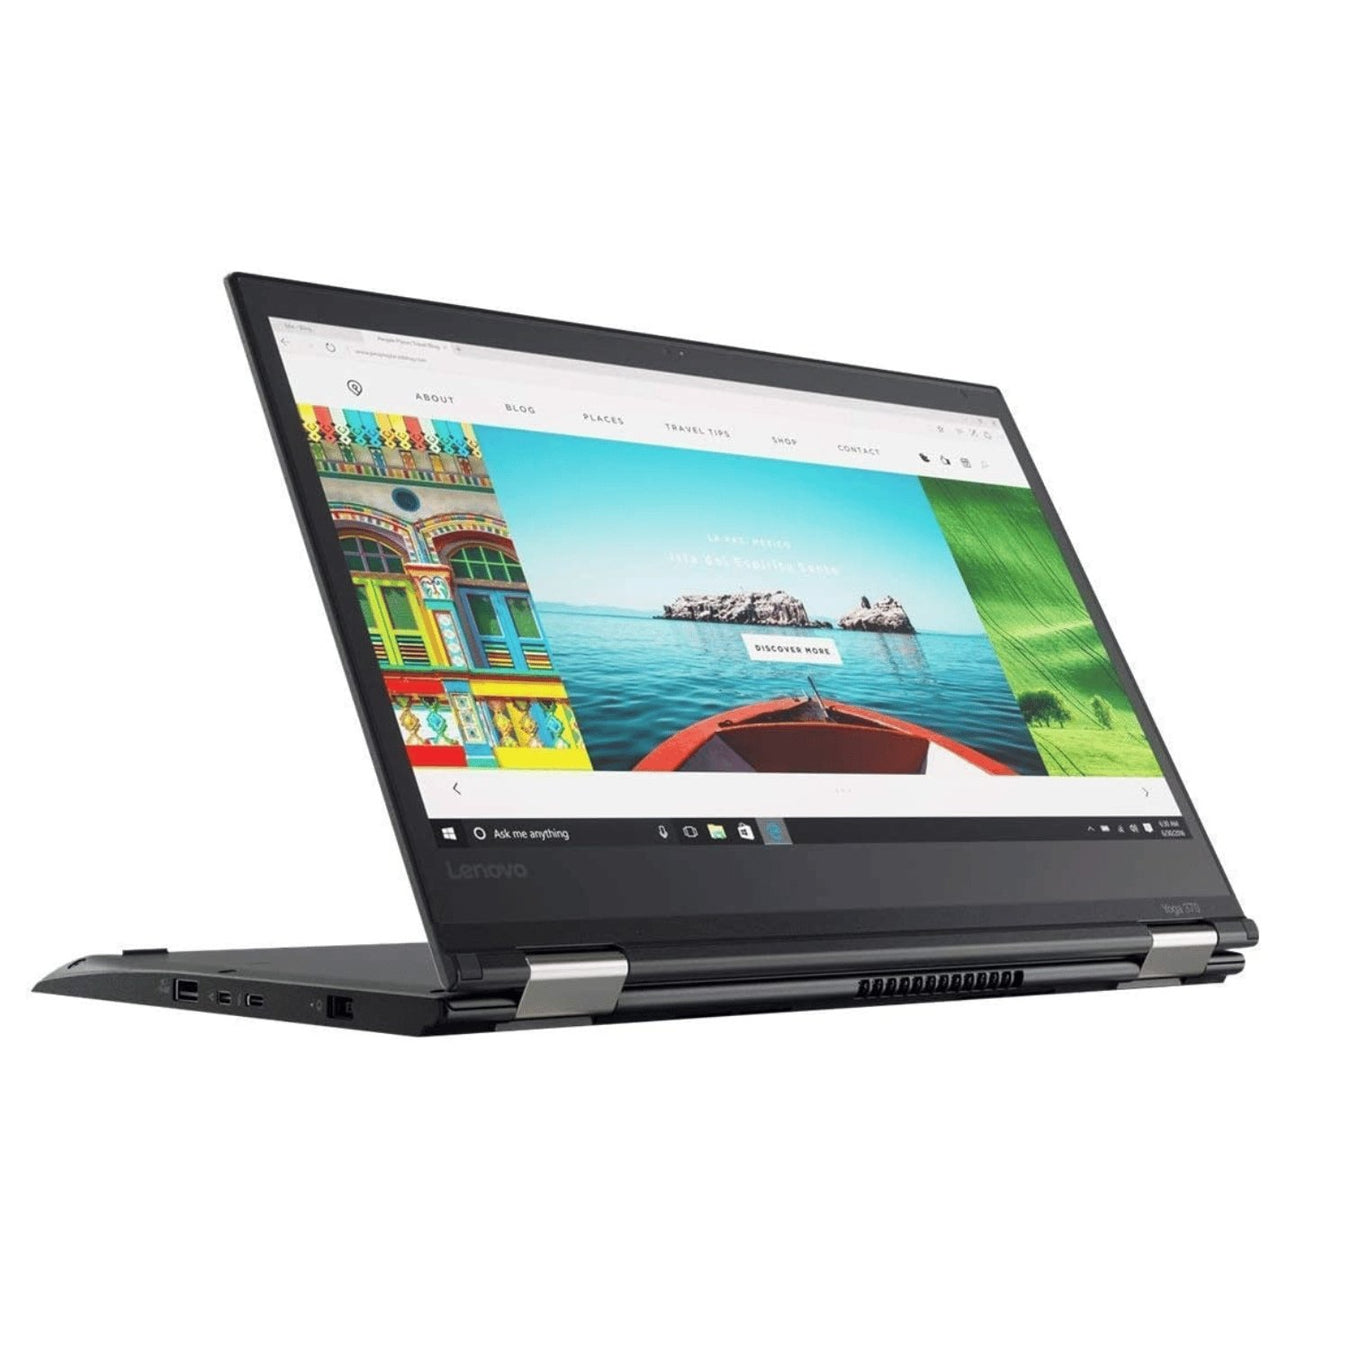 Laptops - The Smart Store